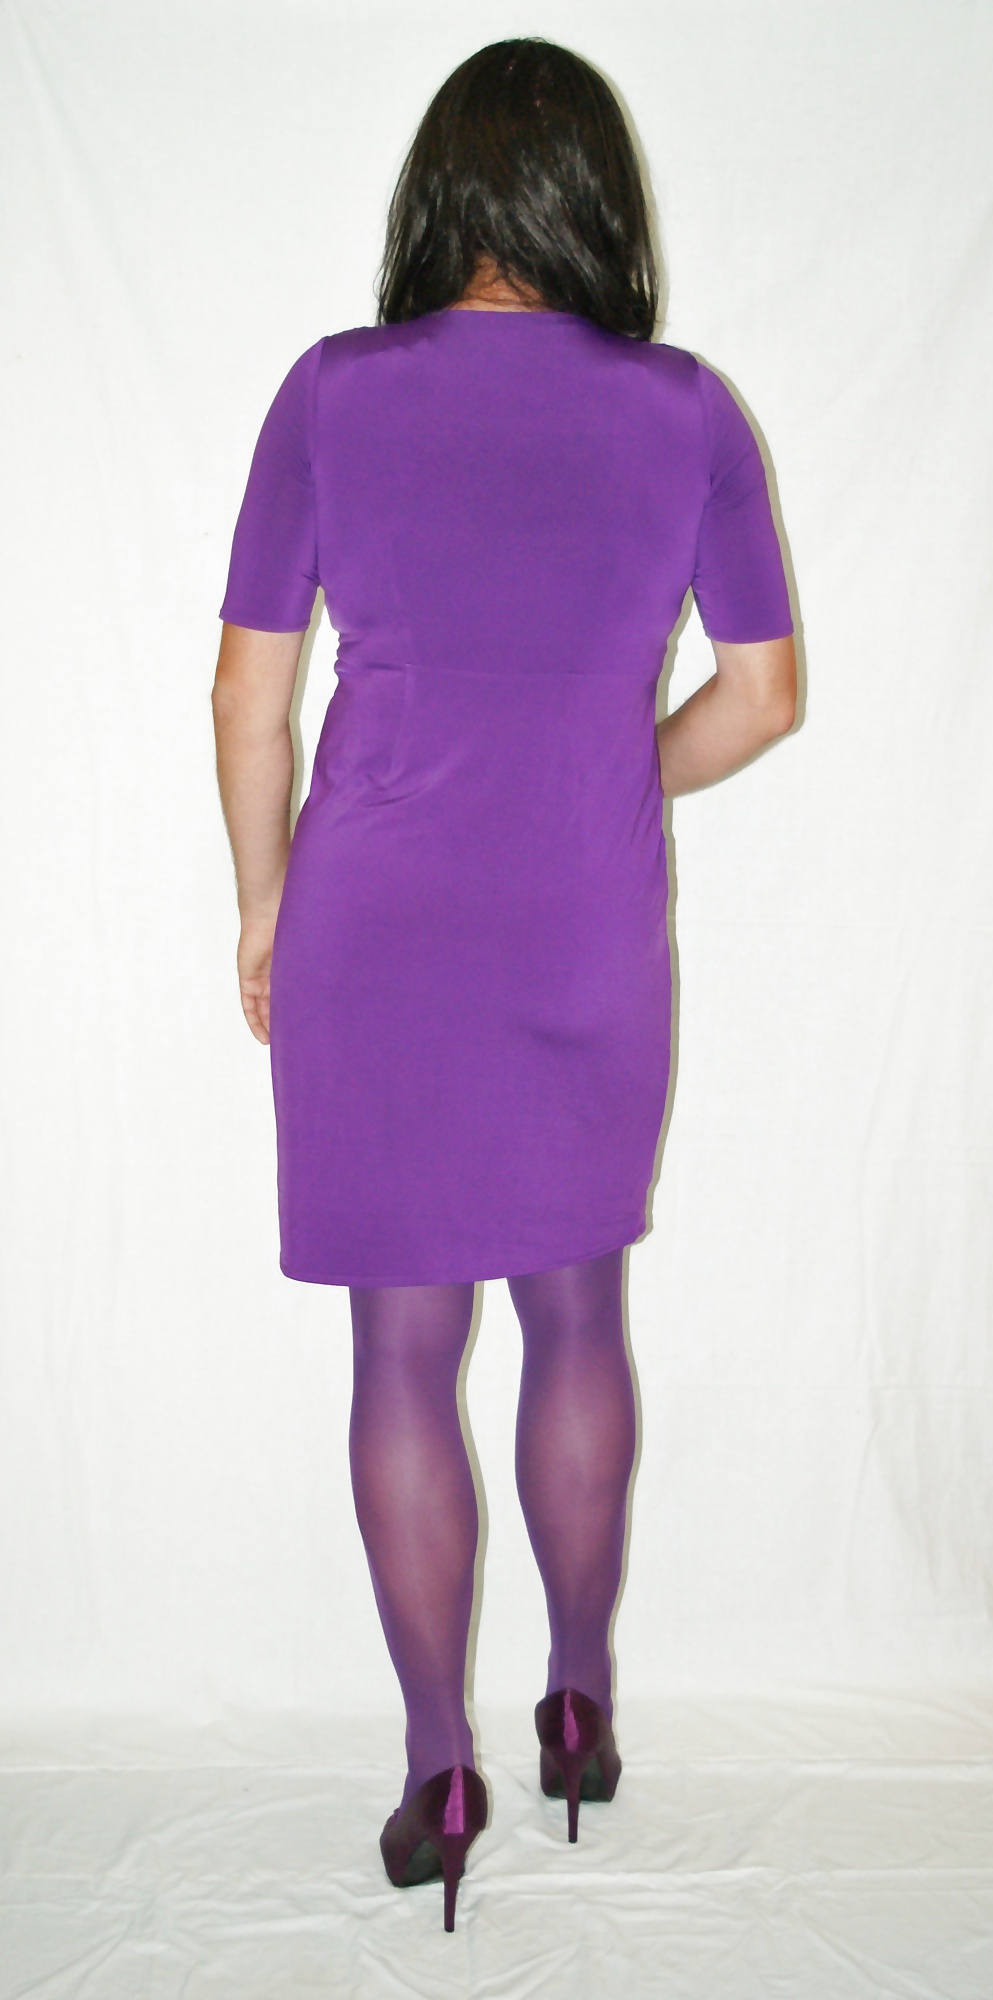 Violet Dress and pantyhose #41059939